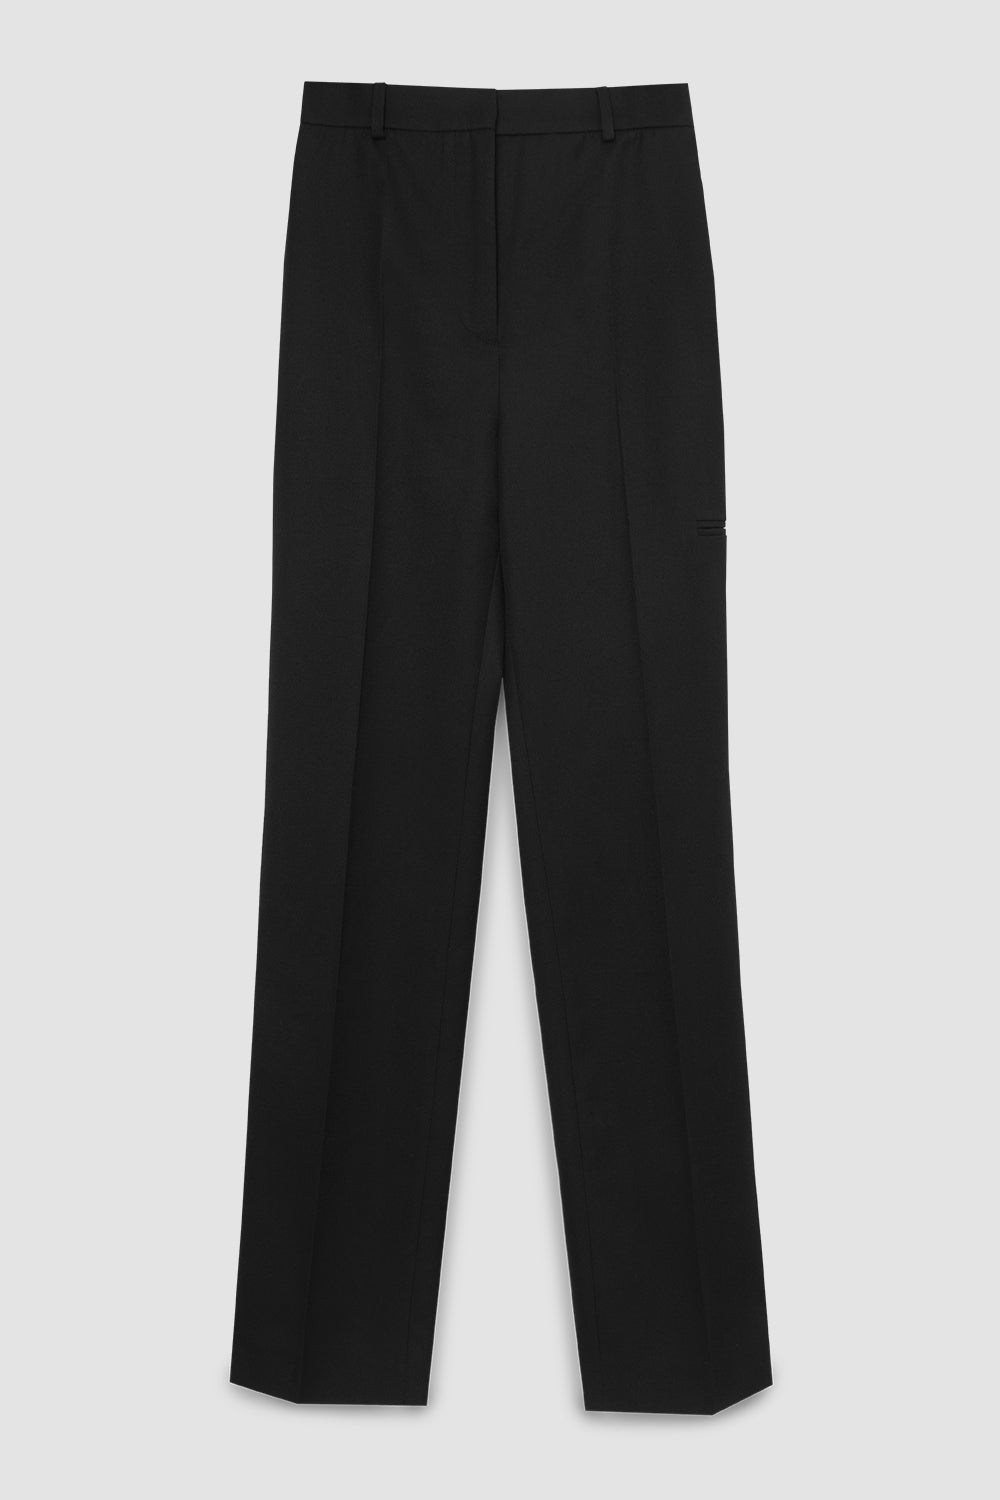 'Receptionist' Straight Trousers